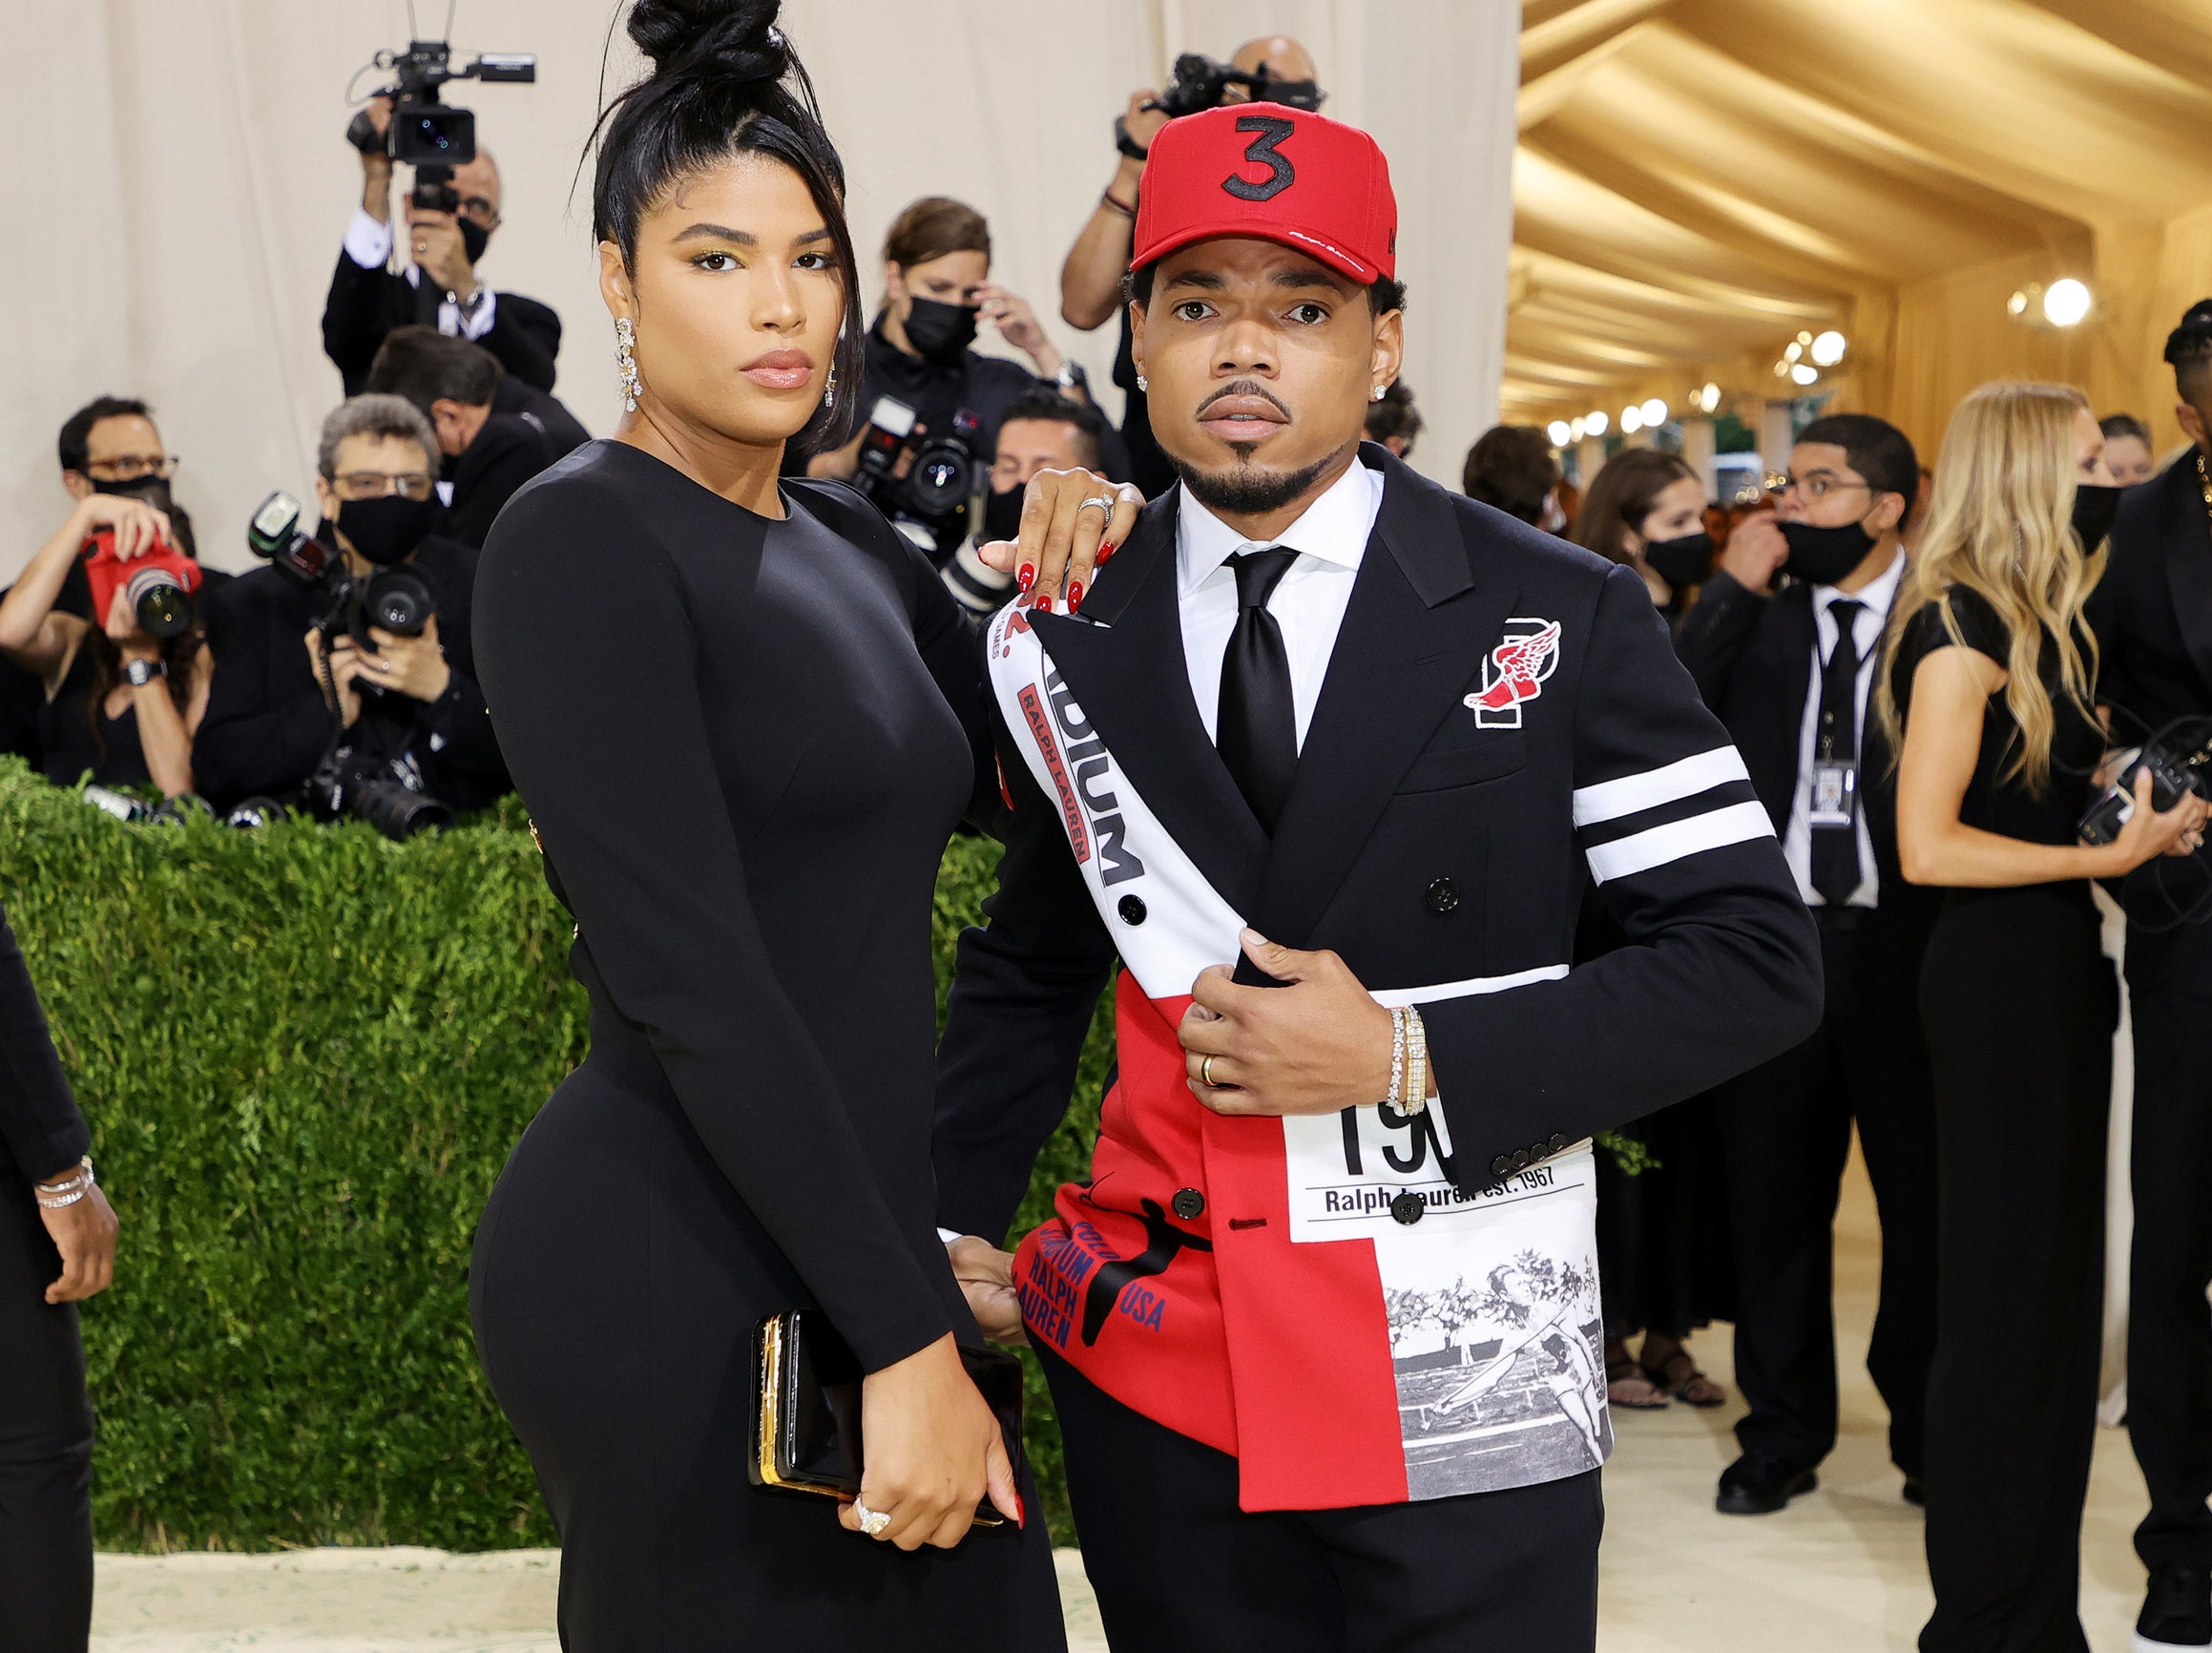 Kirsten Corley and Chance the Rapper attend The 2021 Met Gala Celebrating In America: A Lexicon Of Fashion